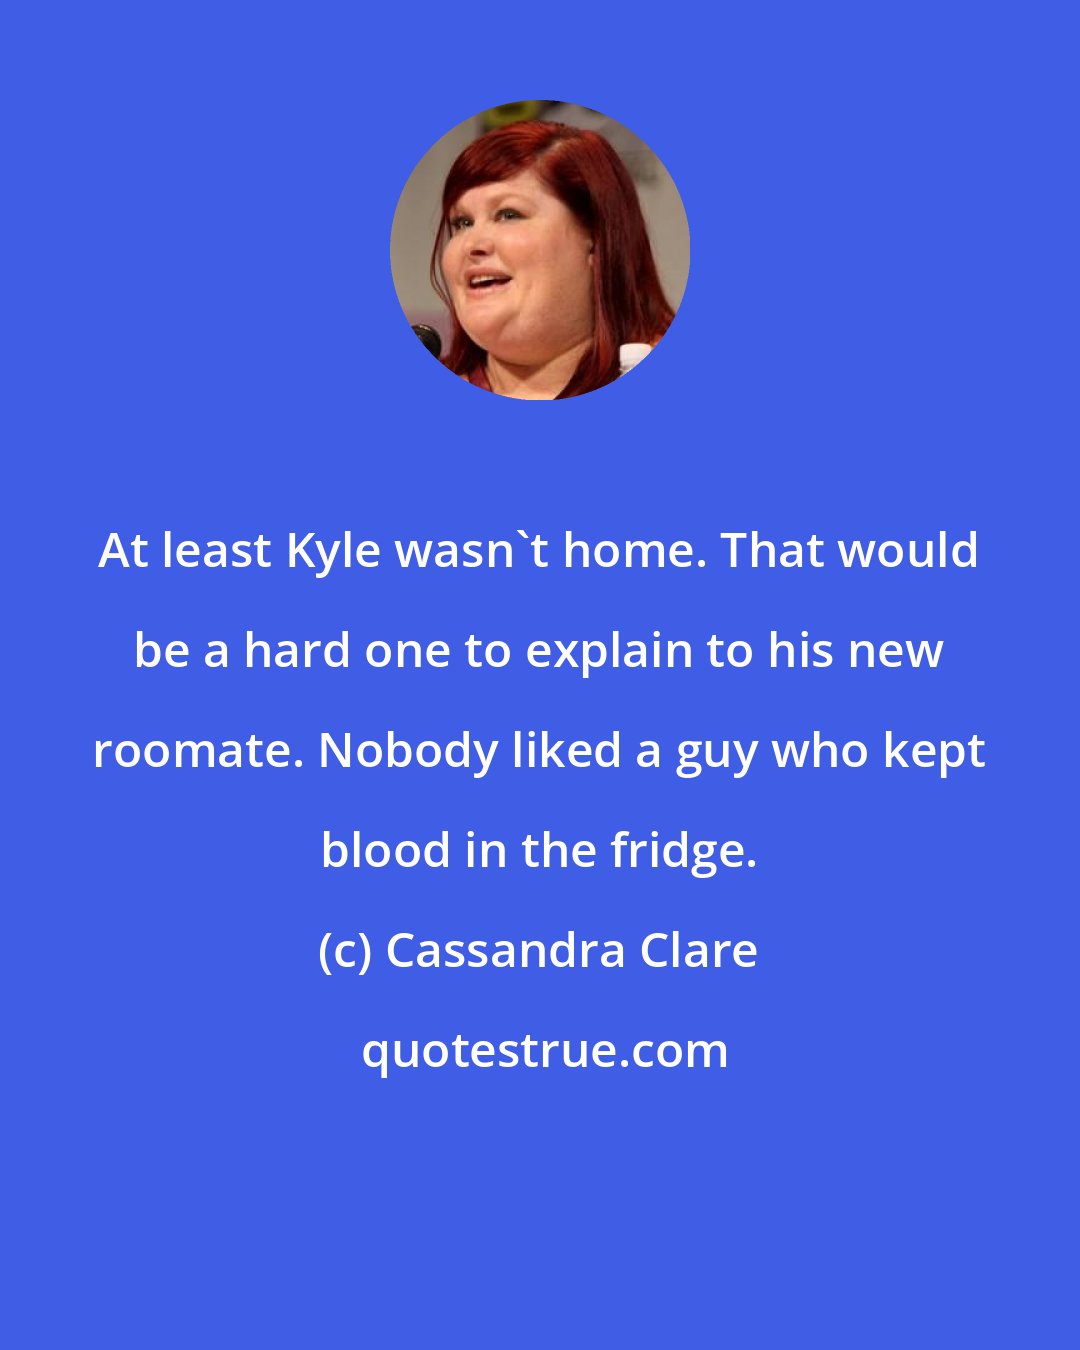 Cassandra Clare: At least Kyle wasn't home. That would be a hard one to explain to his new roomate. Nobody liked a guy who kept blood in the fridge.